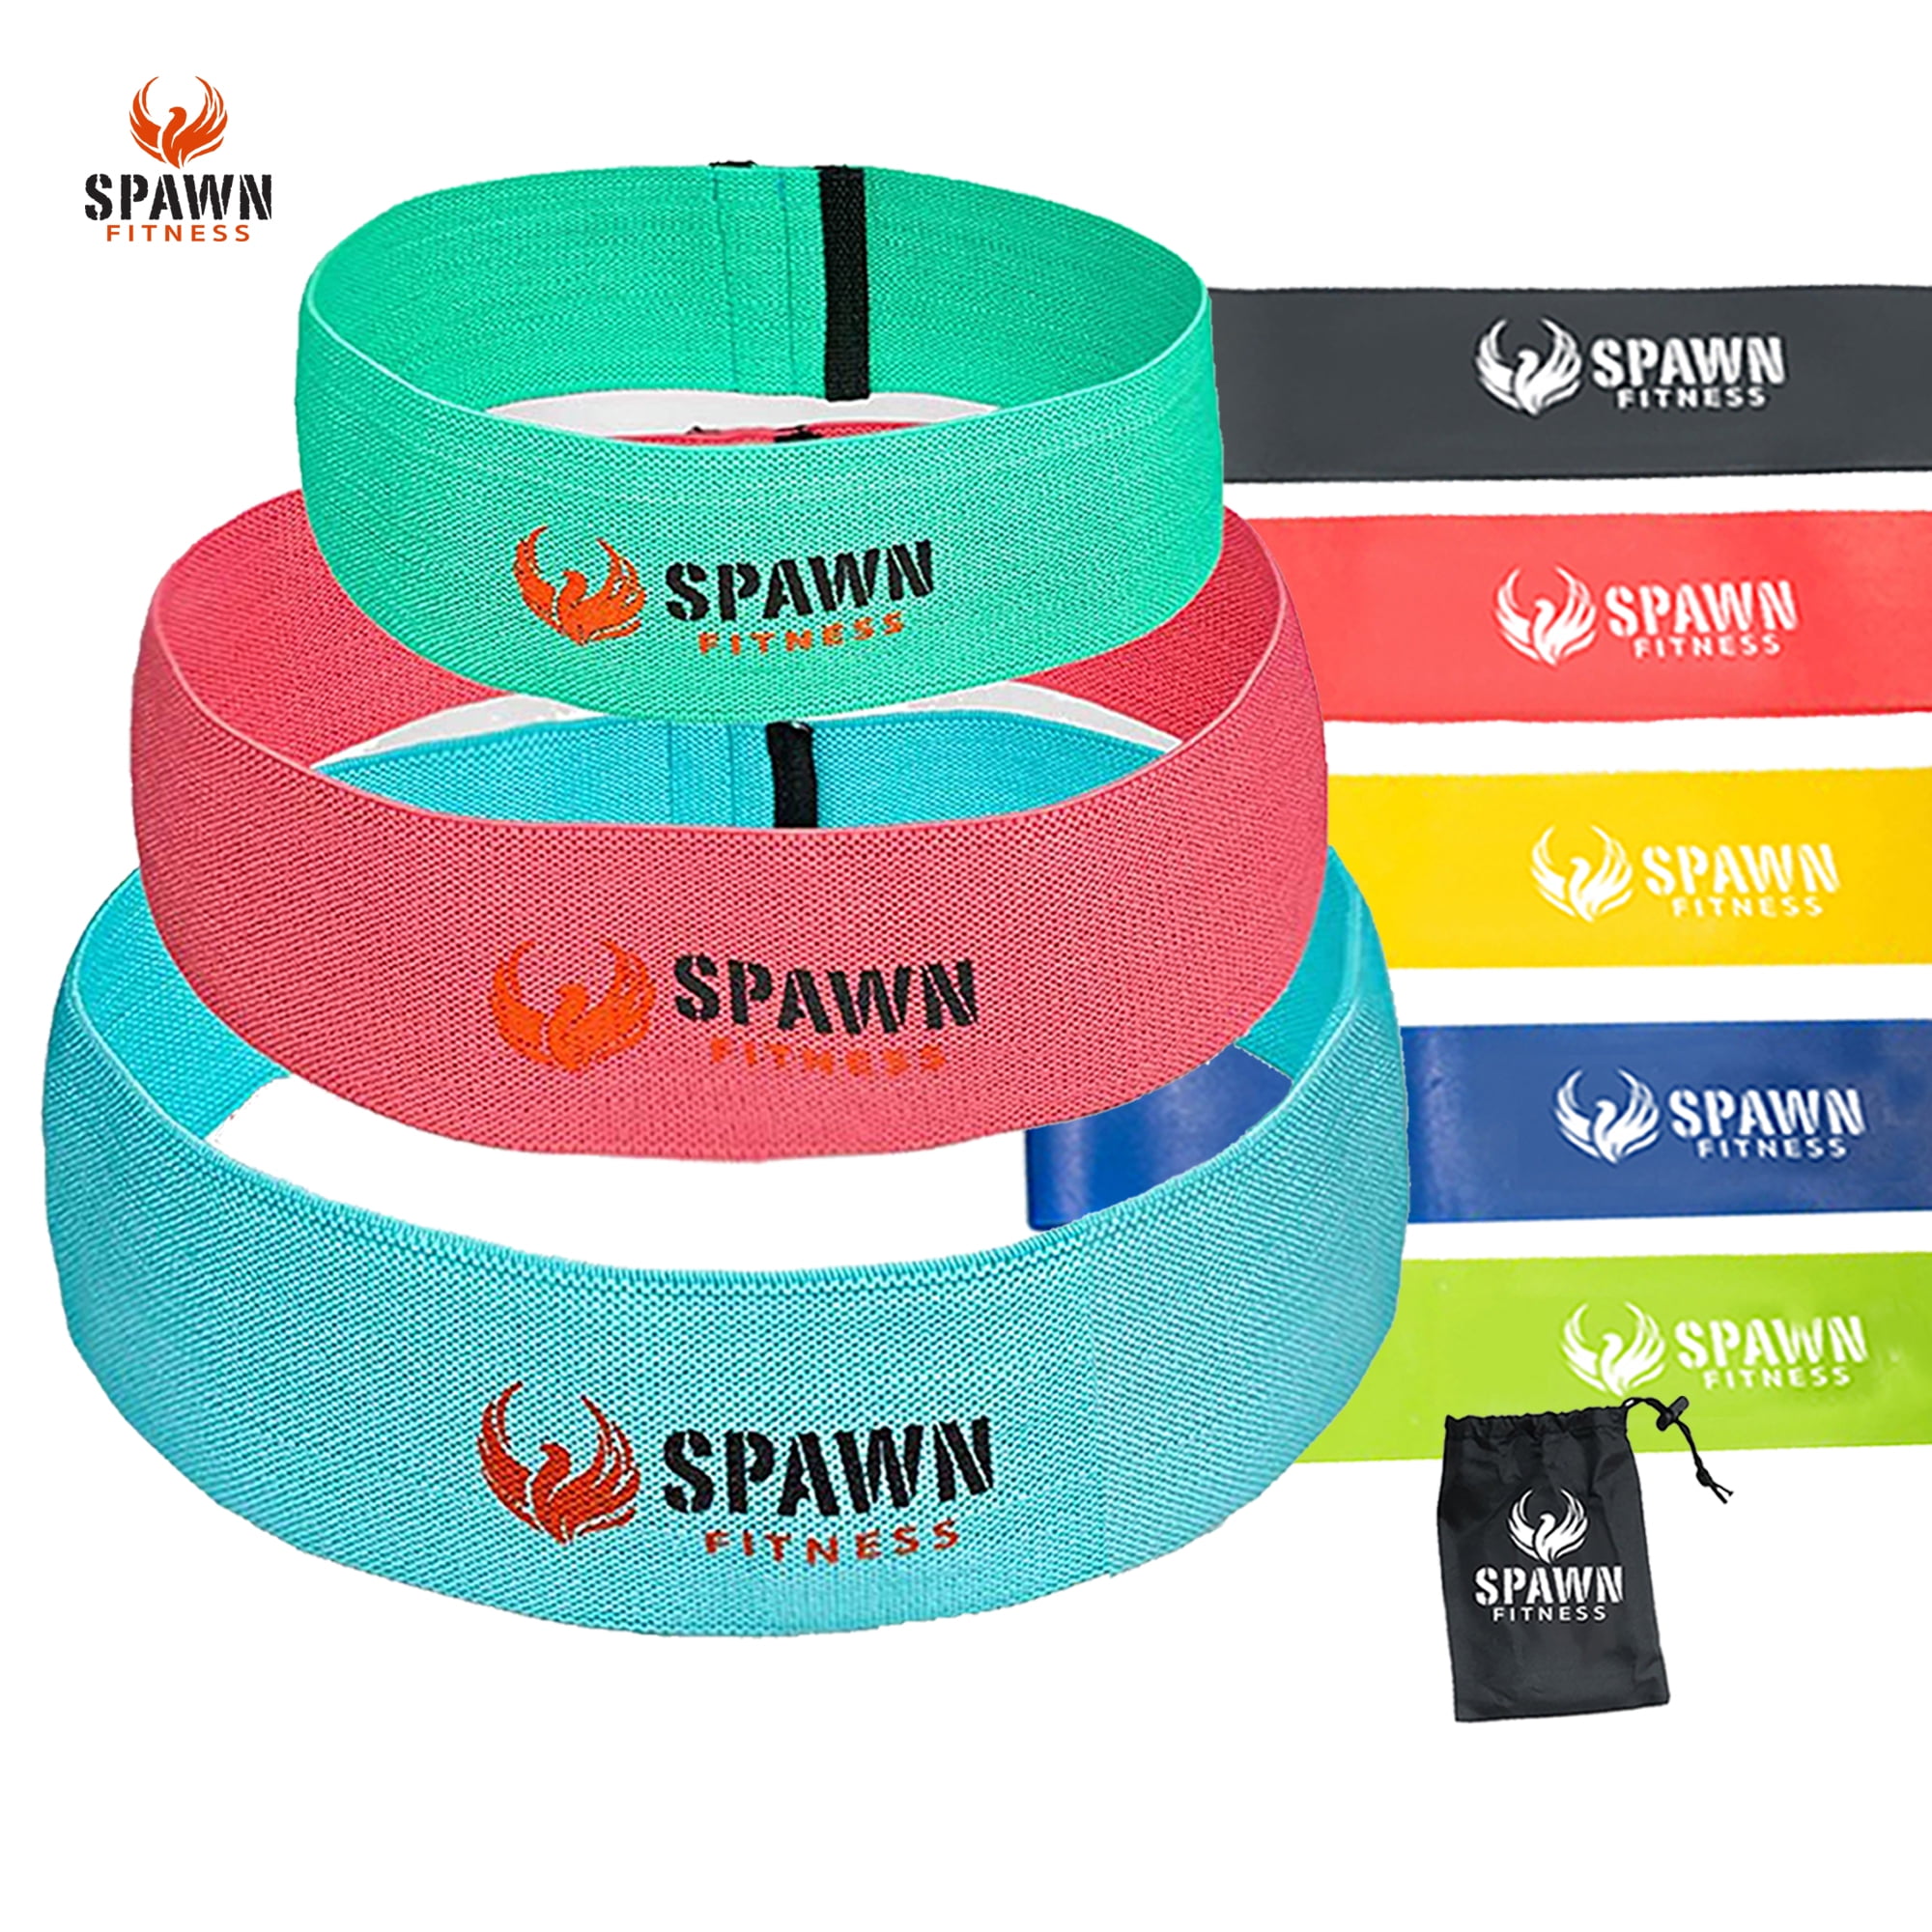 Spawn Fitness Fabric Resistance Bands Set of 3 with 5 Latex